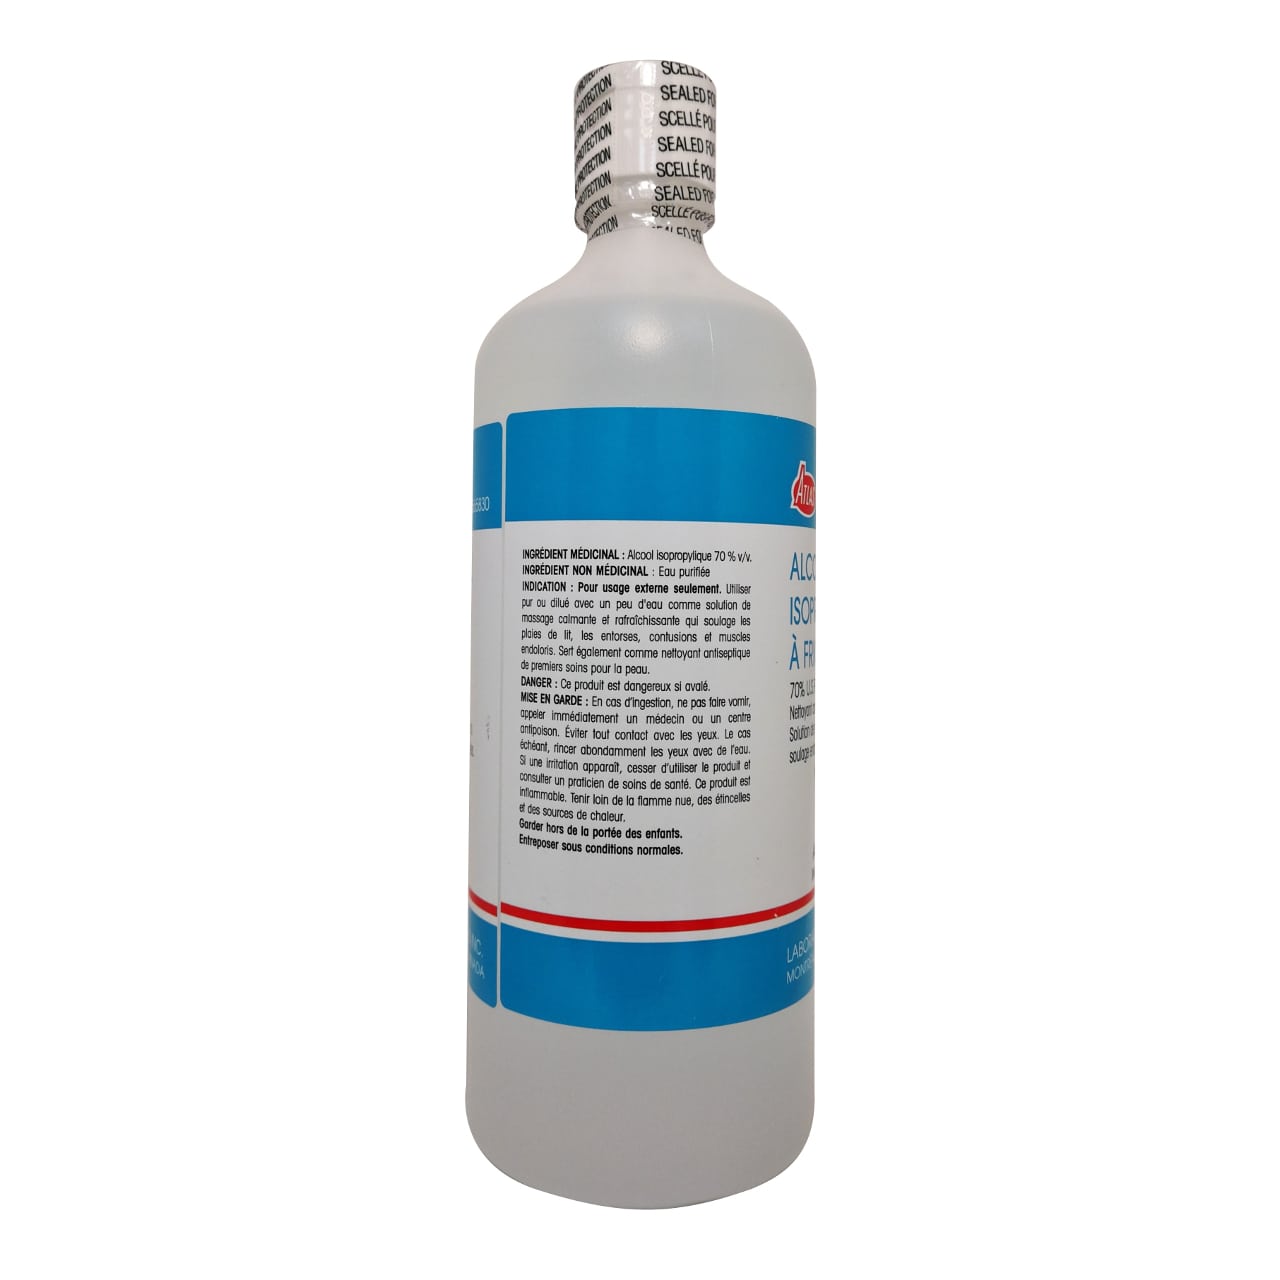 Product details, ingredients, directions, and cautions for Atlas Isopropyl Alcohol 70% in French